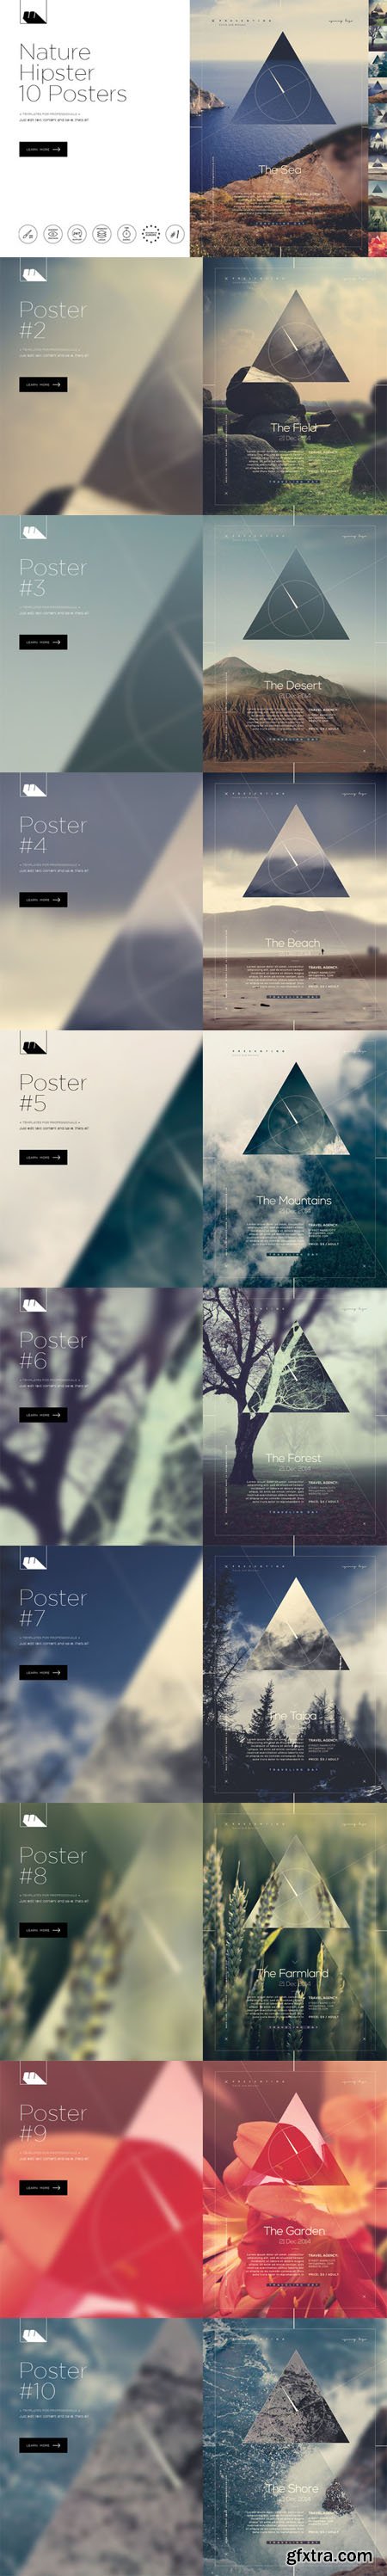 CM - Hipster Nature 10 Posters 494161